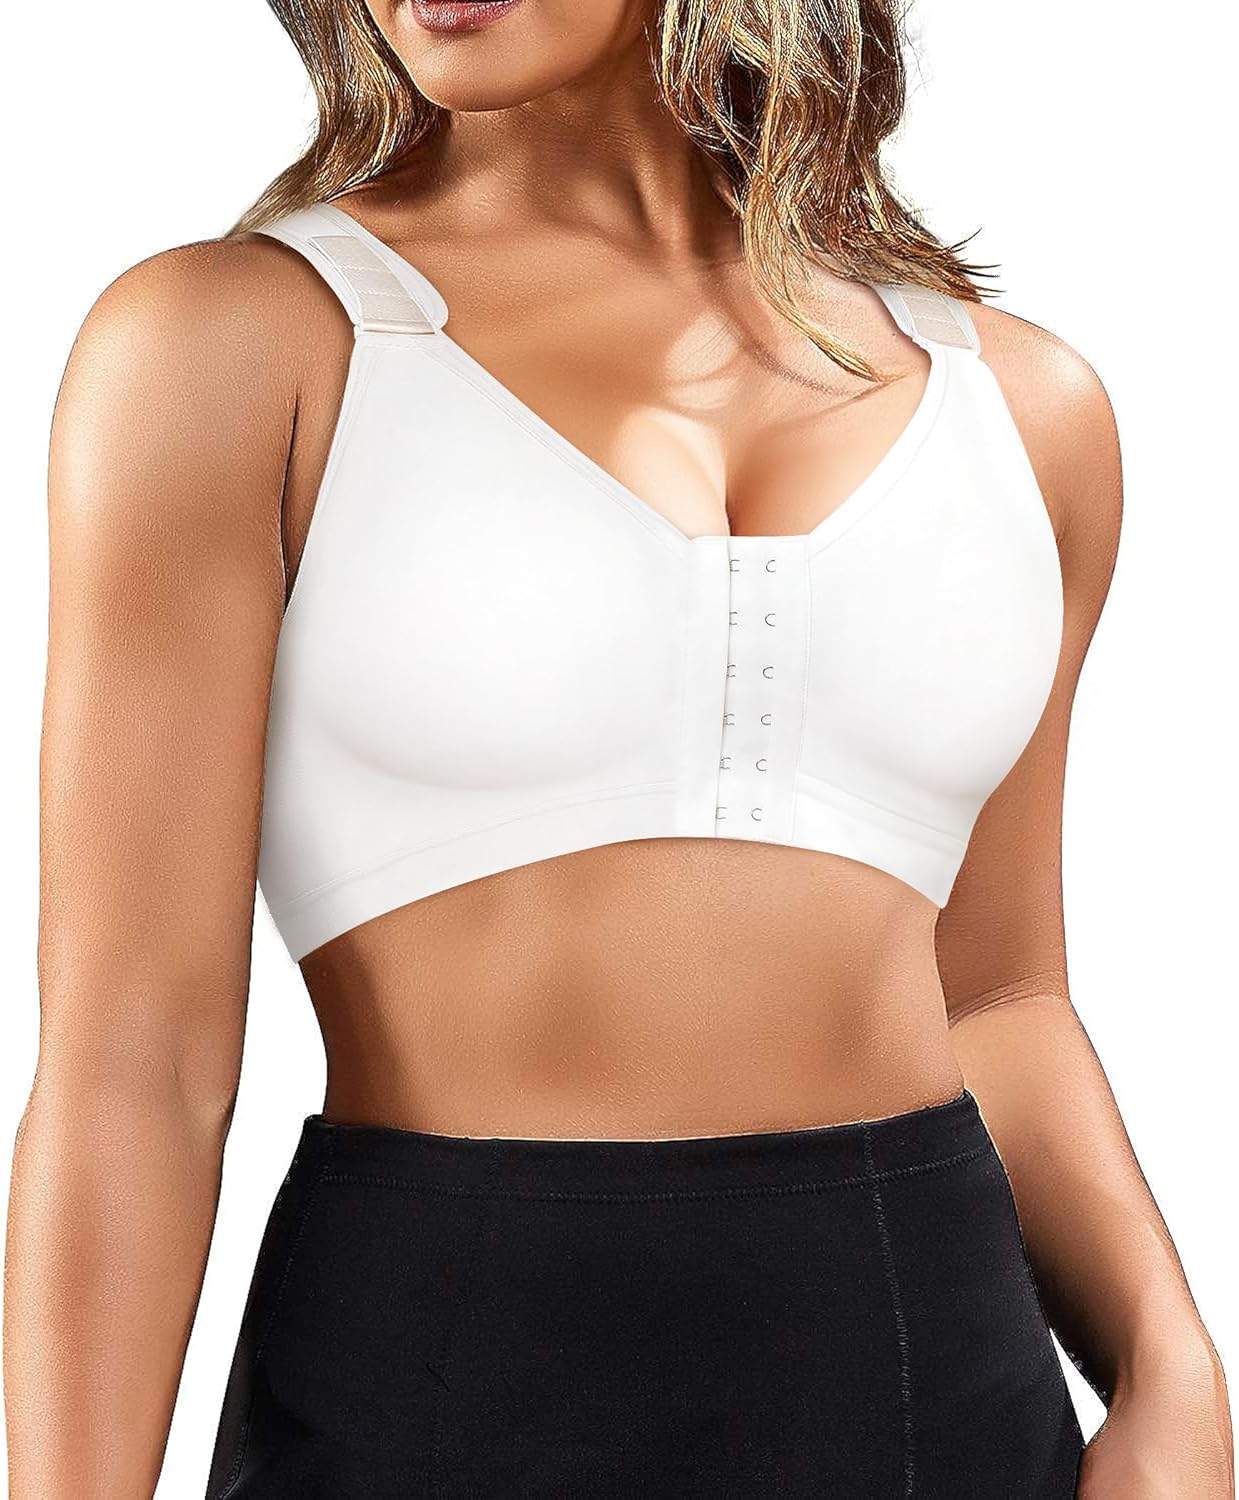  BRABIC Women Post-Surgical Sports Support Bra Front Closure